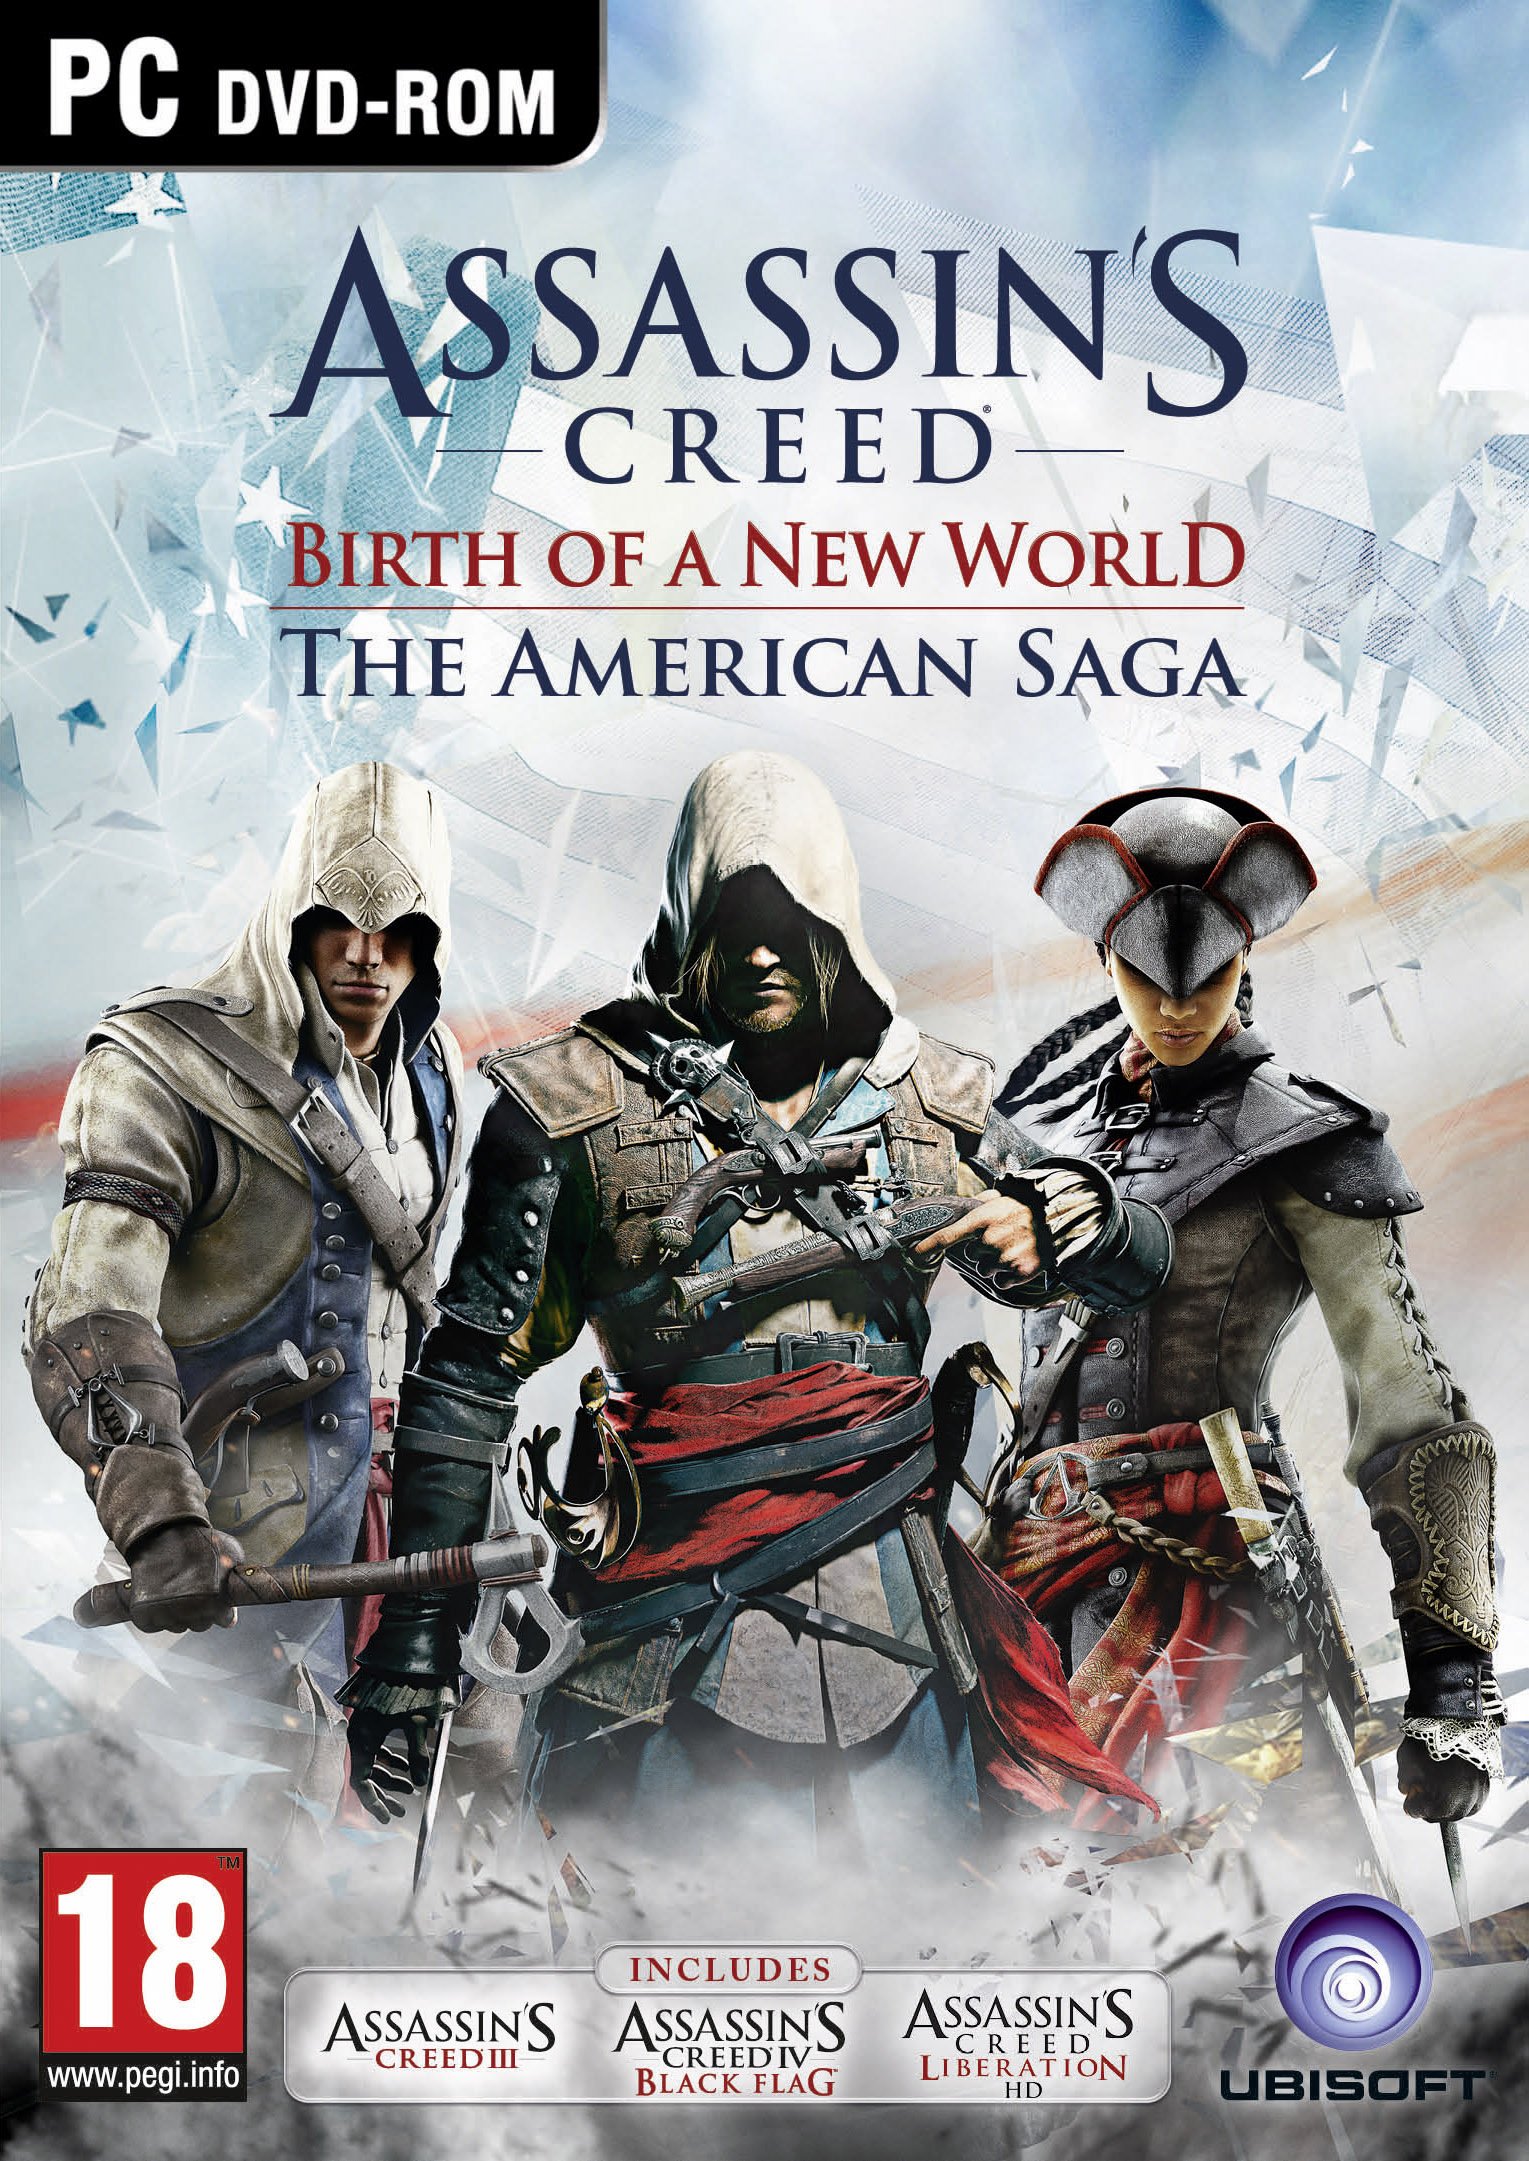 Image of Assassin's Creed: The Americas Collection